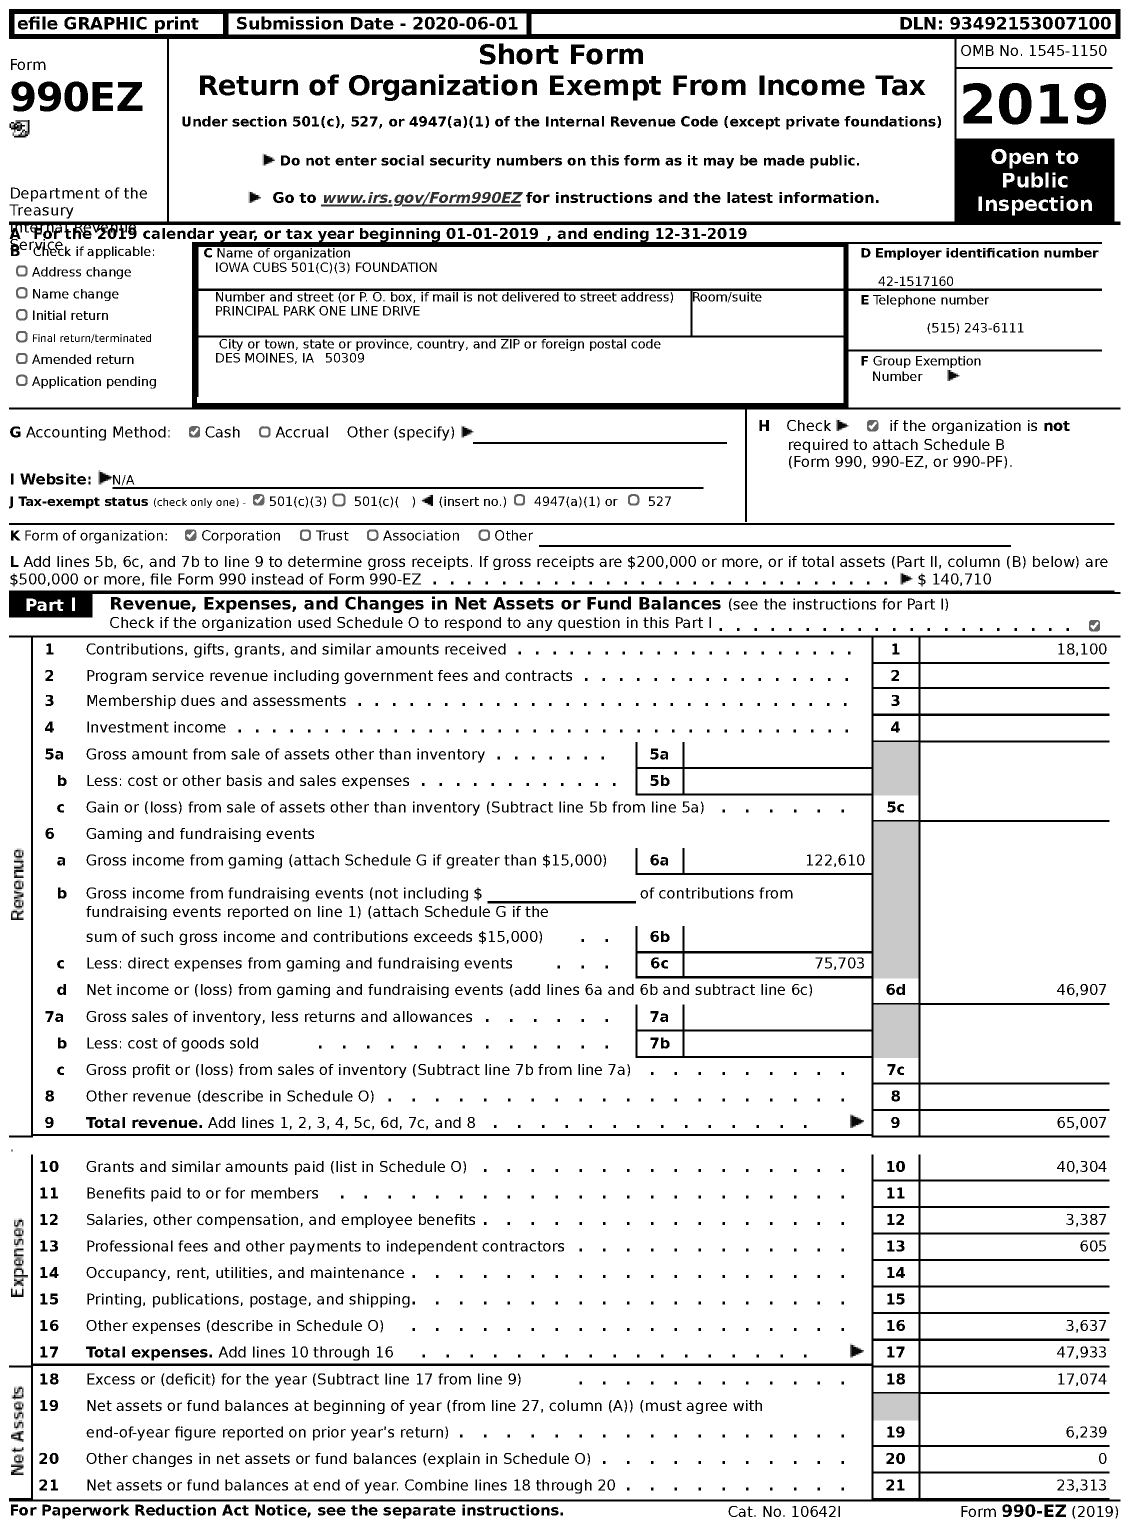 Image of first page of 2019 Form 990EZ for Iowa Cubs 501